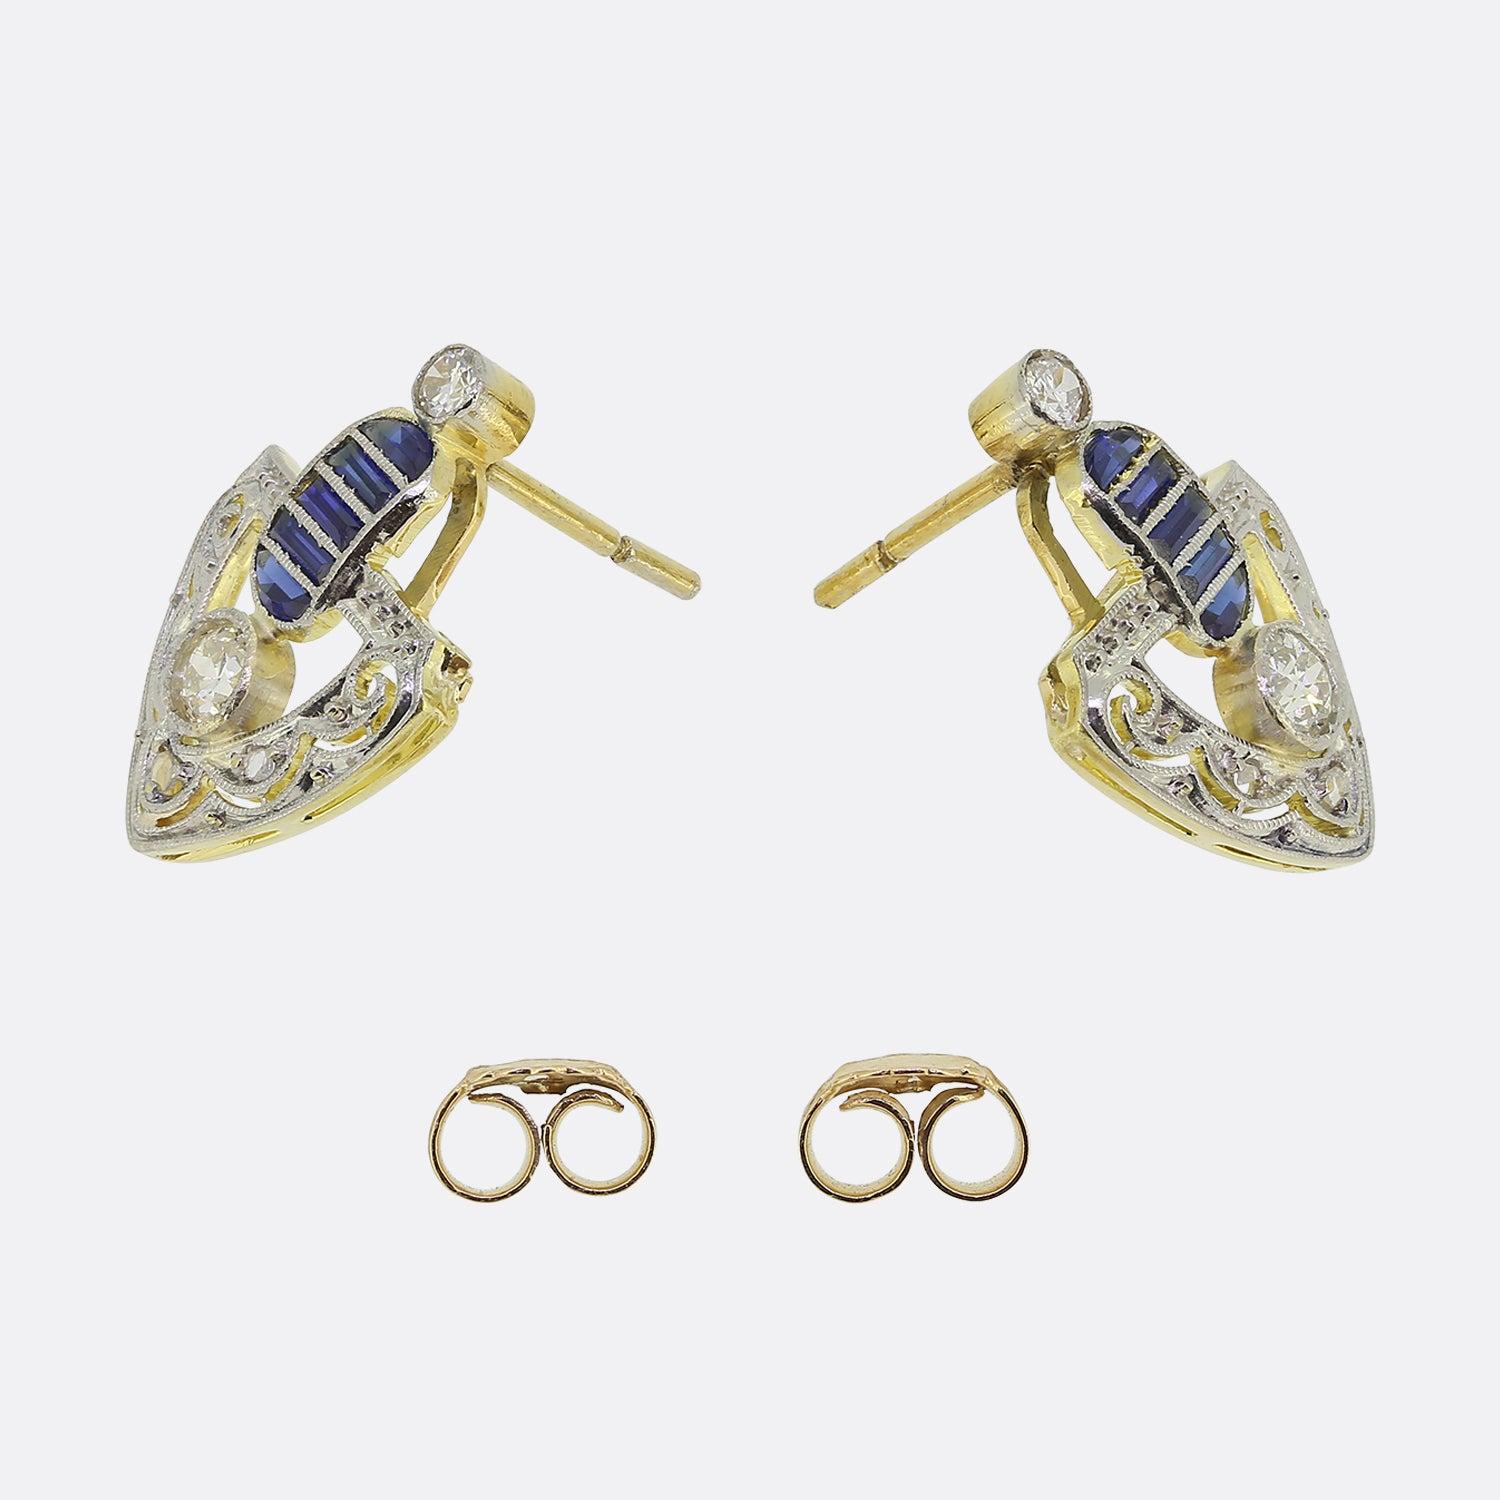 Here we have a beautifully detailed pair of sapphire and diamond drop earrings from the Edwardian era. Each piece showcases an open framework with an intricately detailed beaded pattern. This ornate design compliments the centralised round diamond